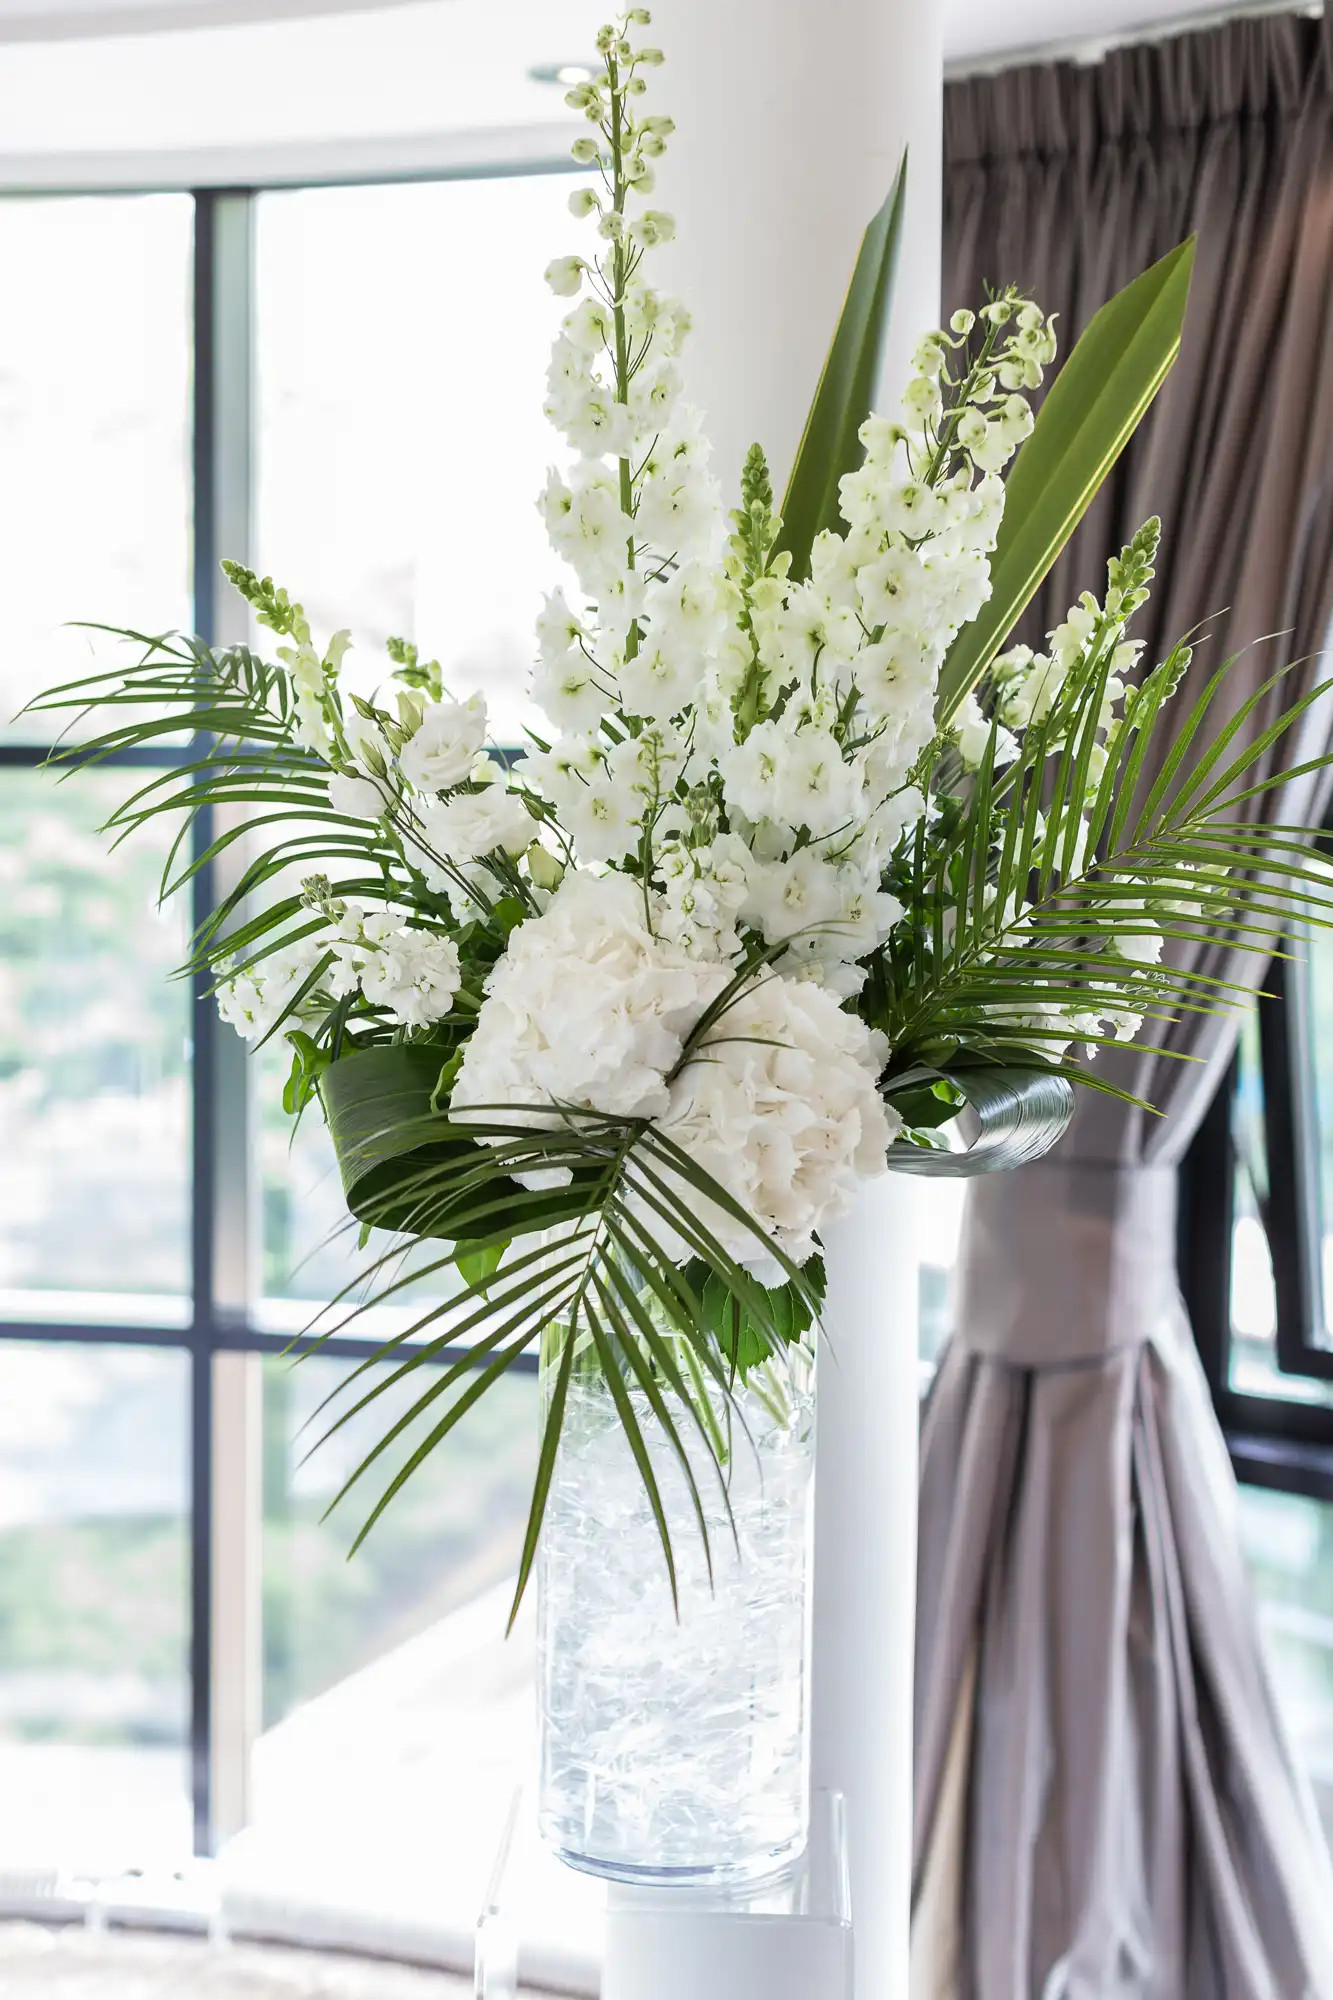 Elegant floral arrangement featuring white hydrangeas, tall snapdragons, and tropical palm leaves in a clear vase, set against a window with curtains.